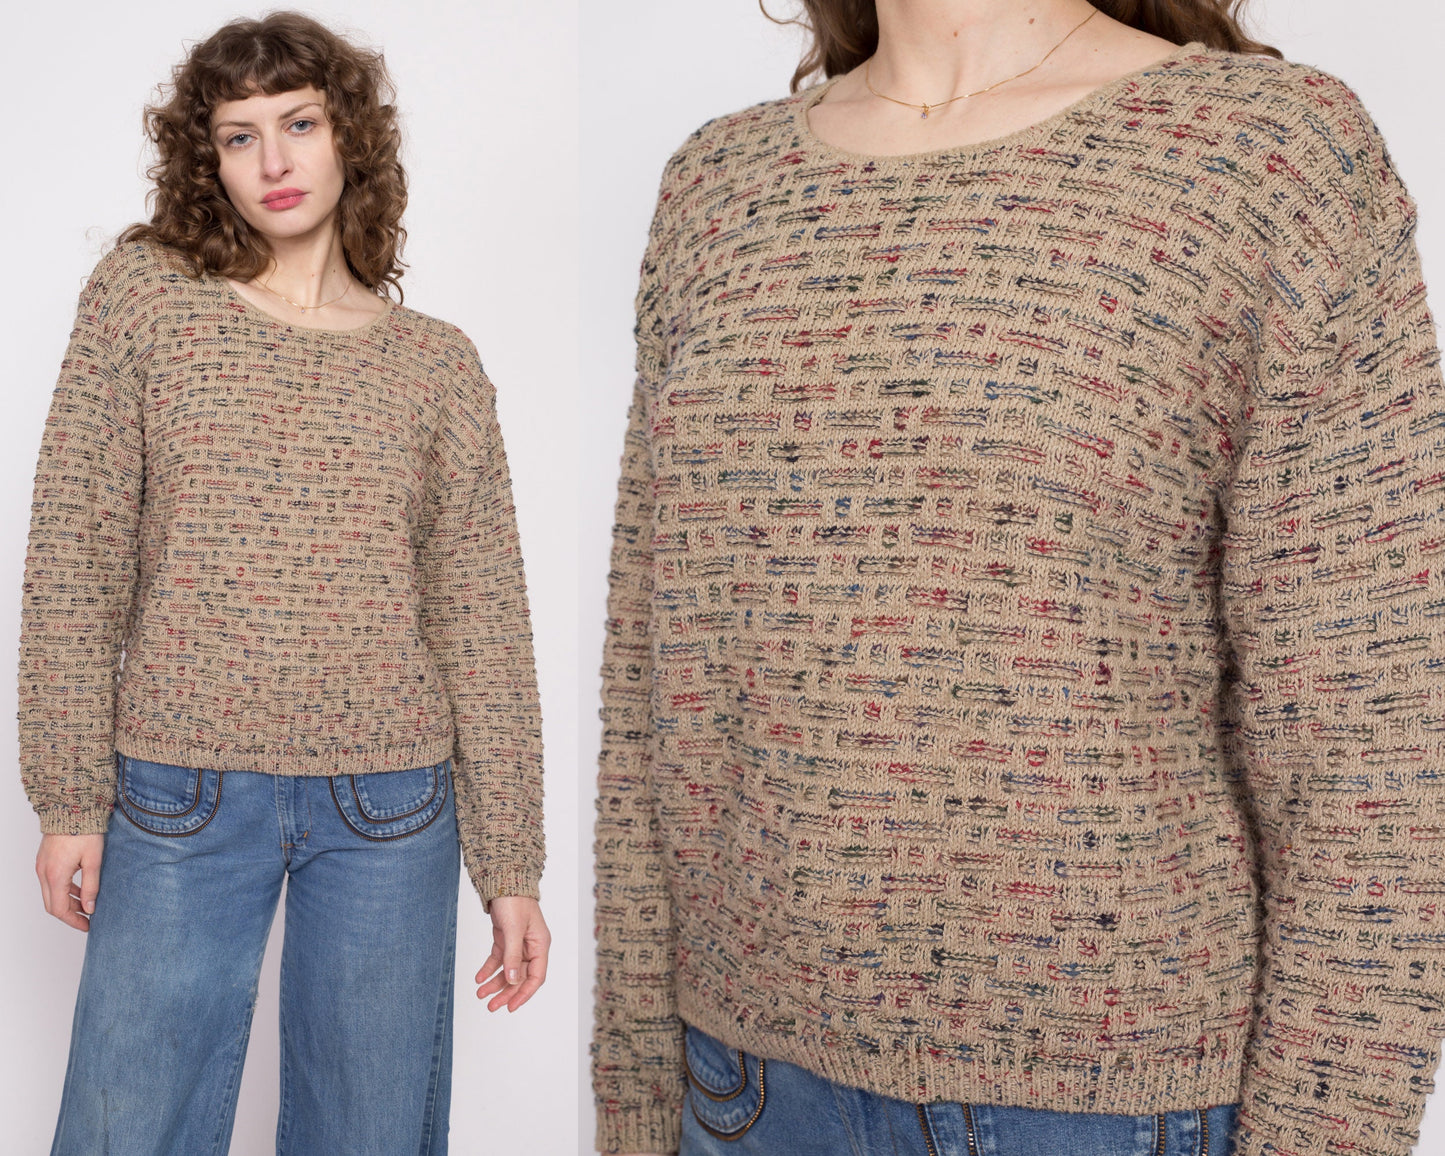 80s 90s Brown Patterned Knit Sweater - Medium